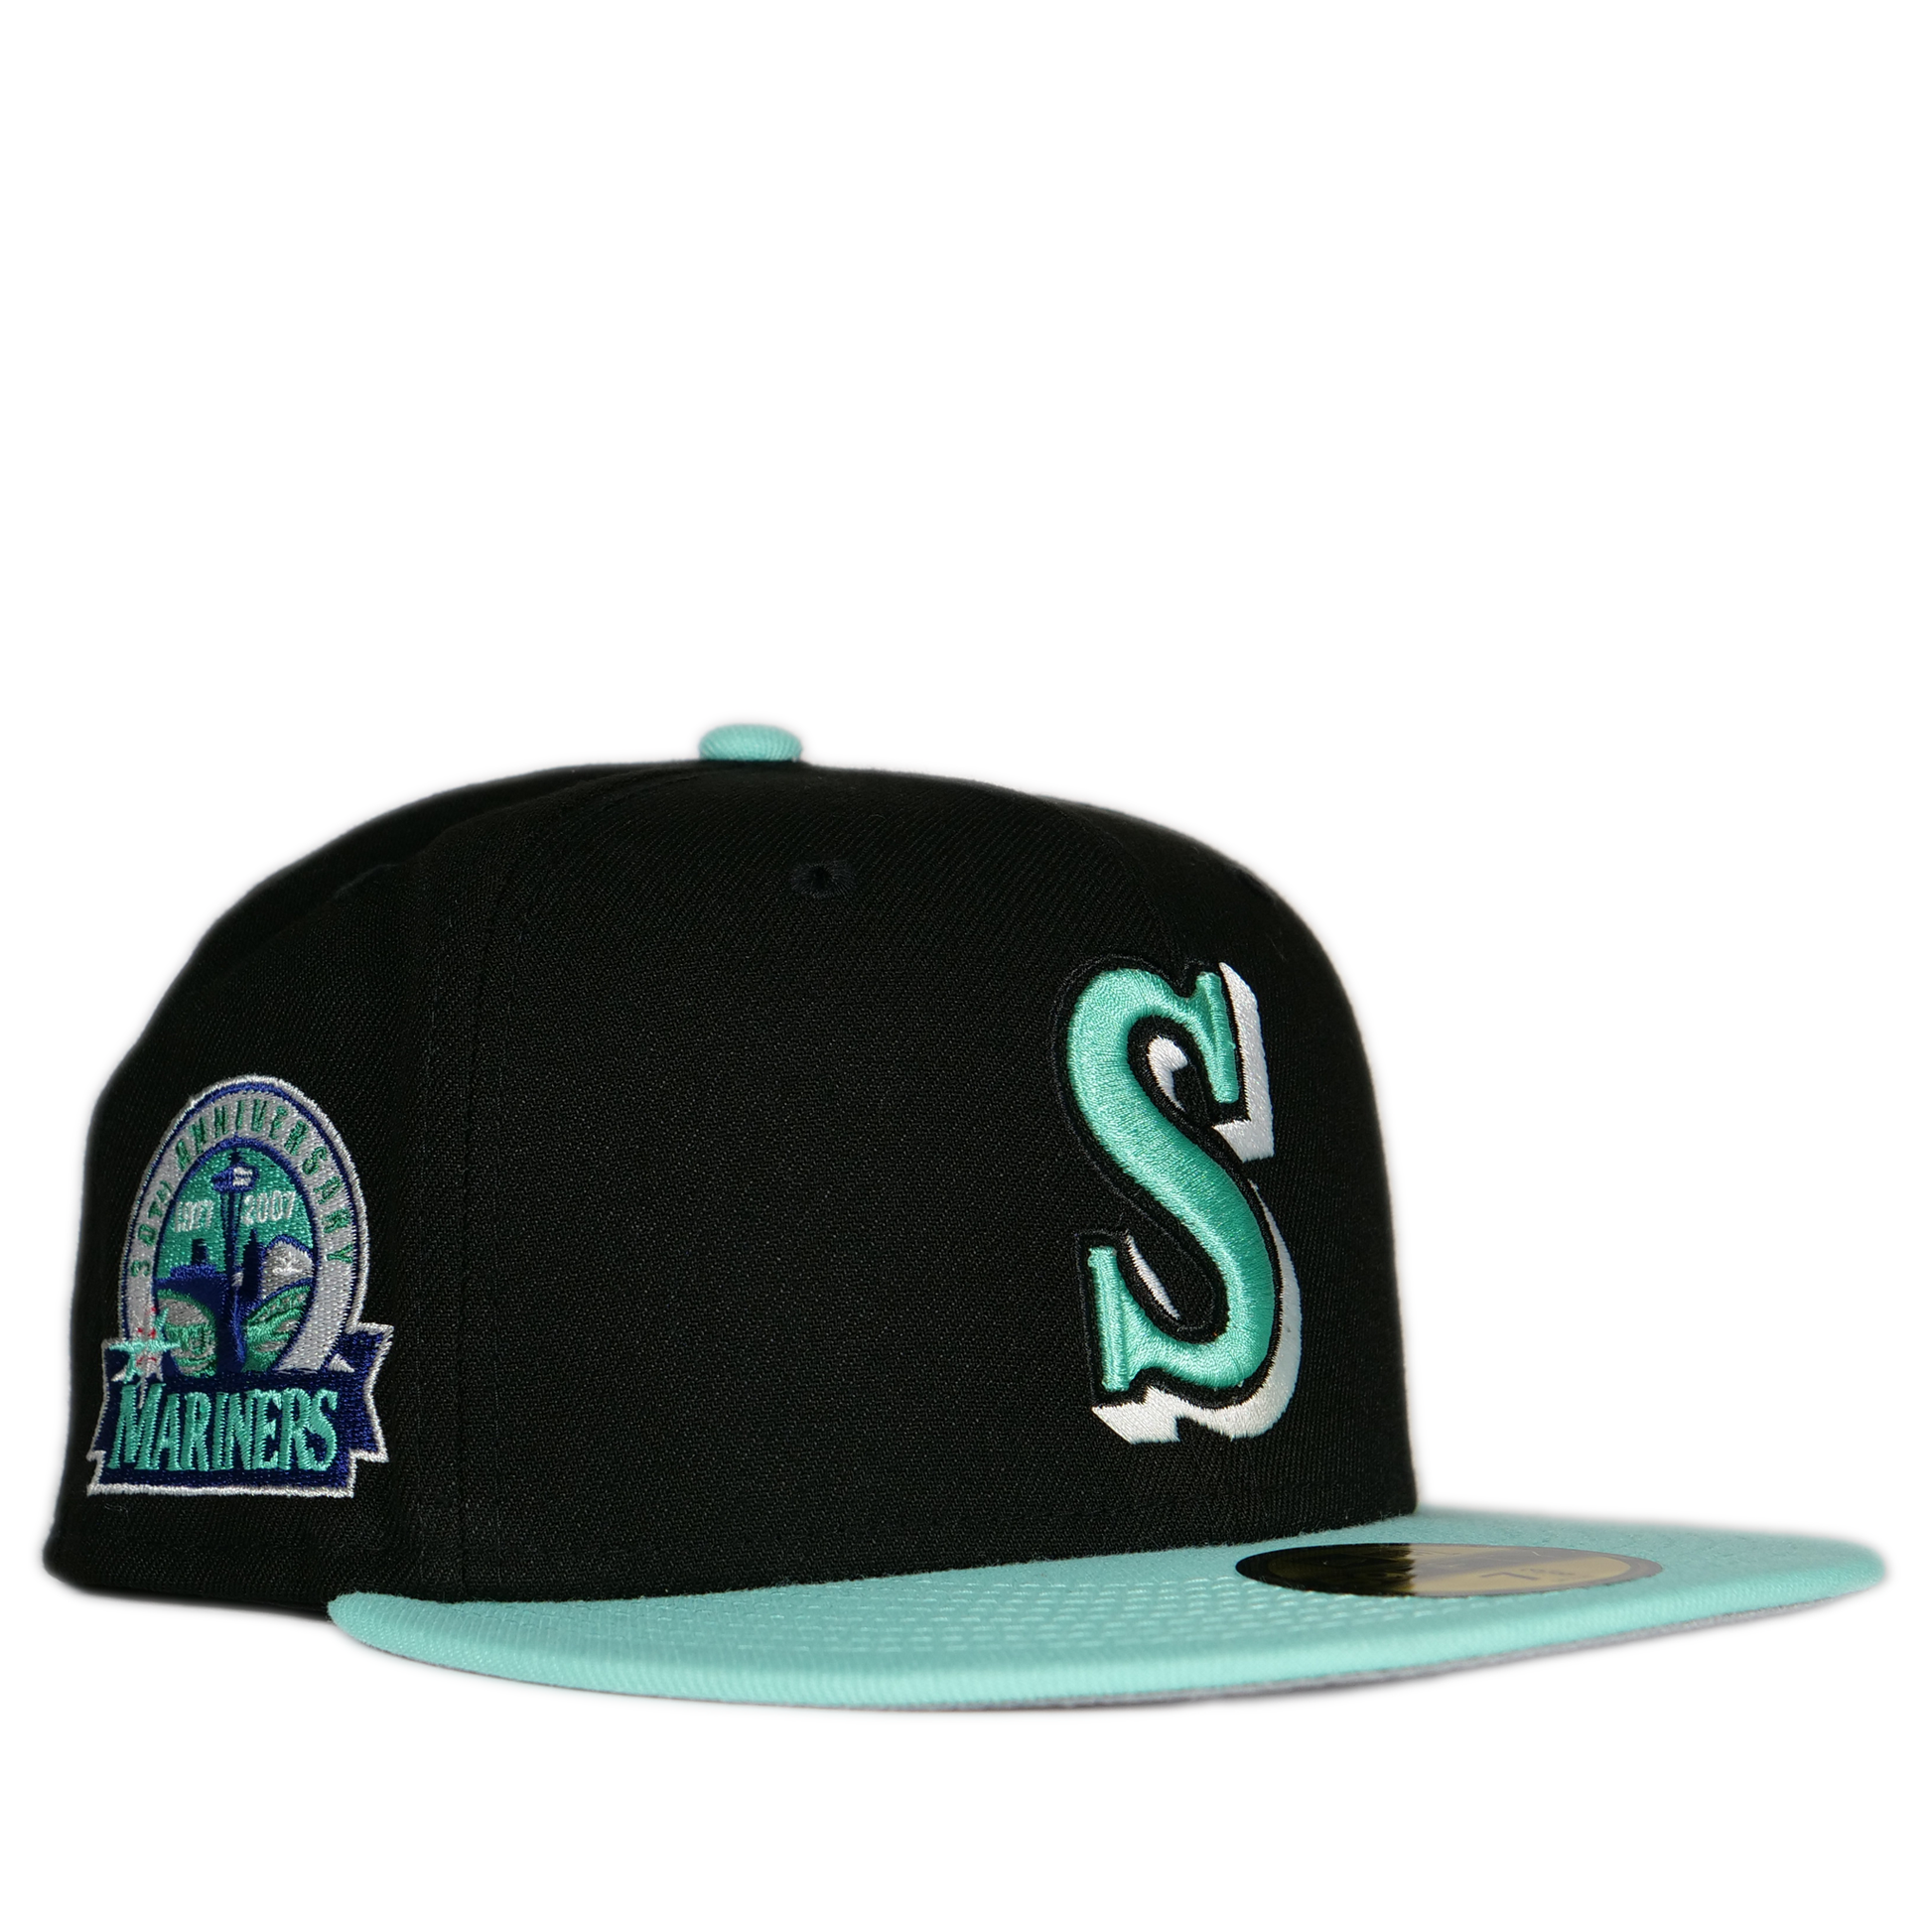 New Era 59FIFTY Seattle Mariners Fitted Hat Dark Green White